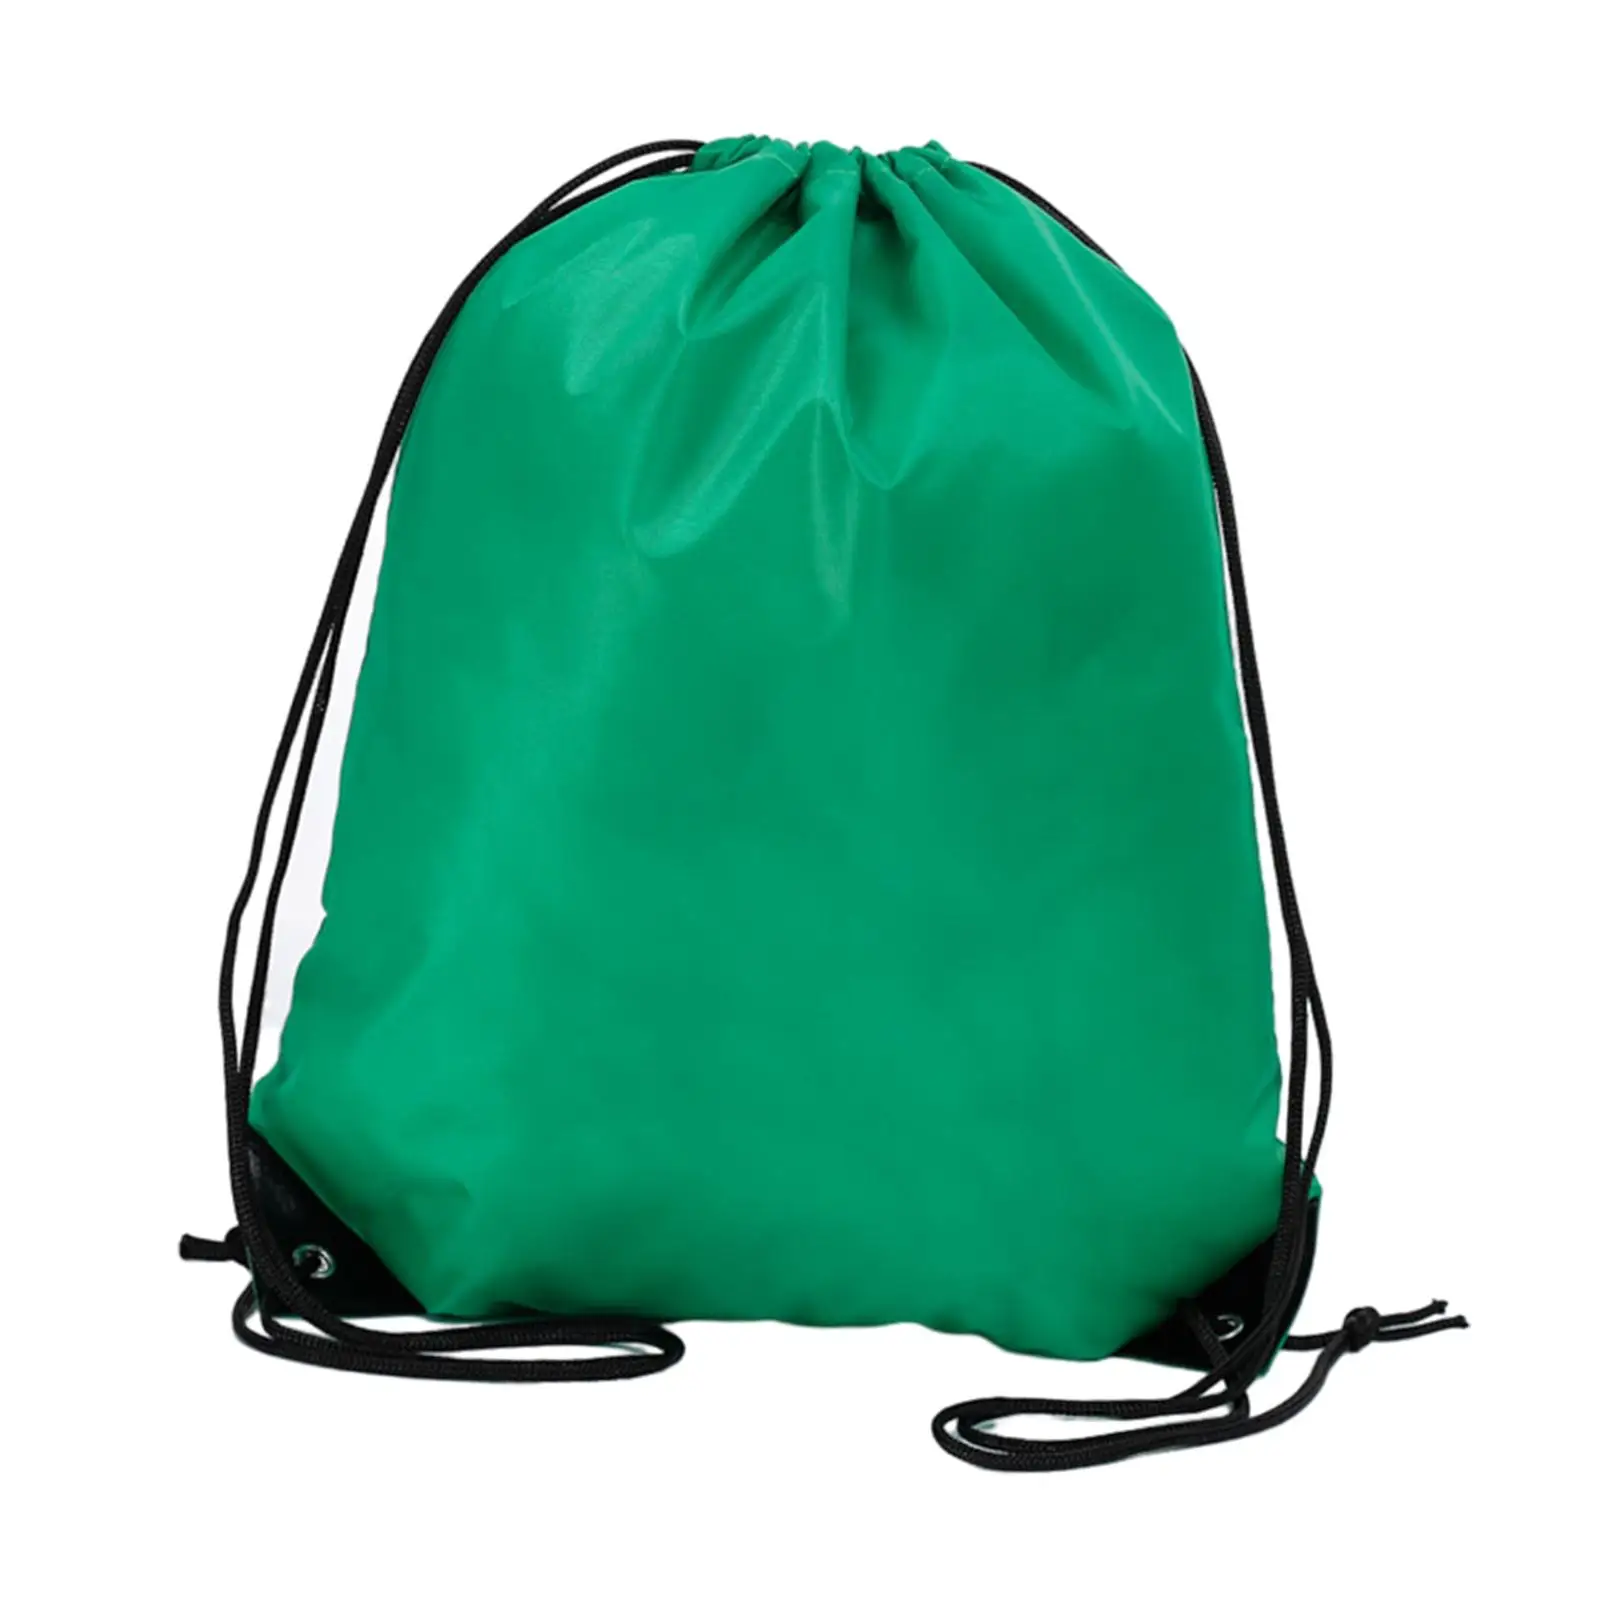 Draw String Bag PE Bags Gym Bag Casual Day Pack Balls Holder Cinch Sack Drawstring Backpack for Adults Men Women Backpacking